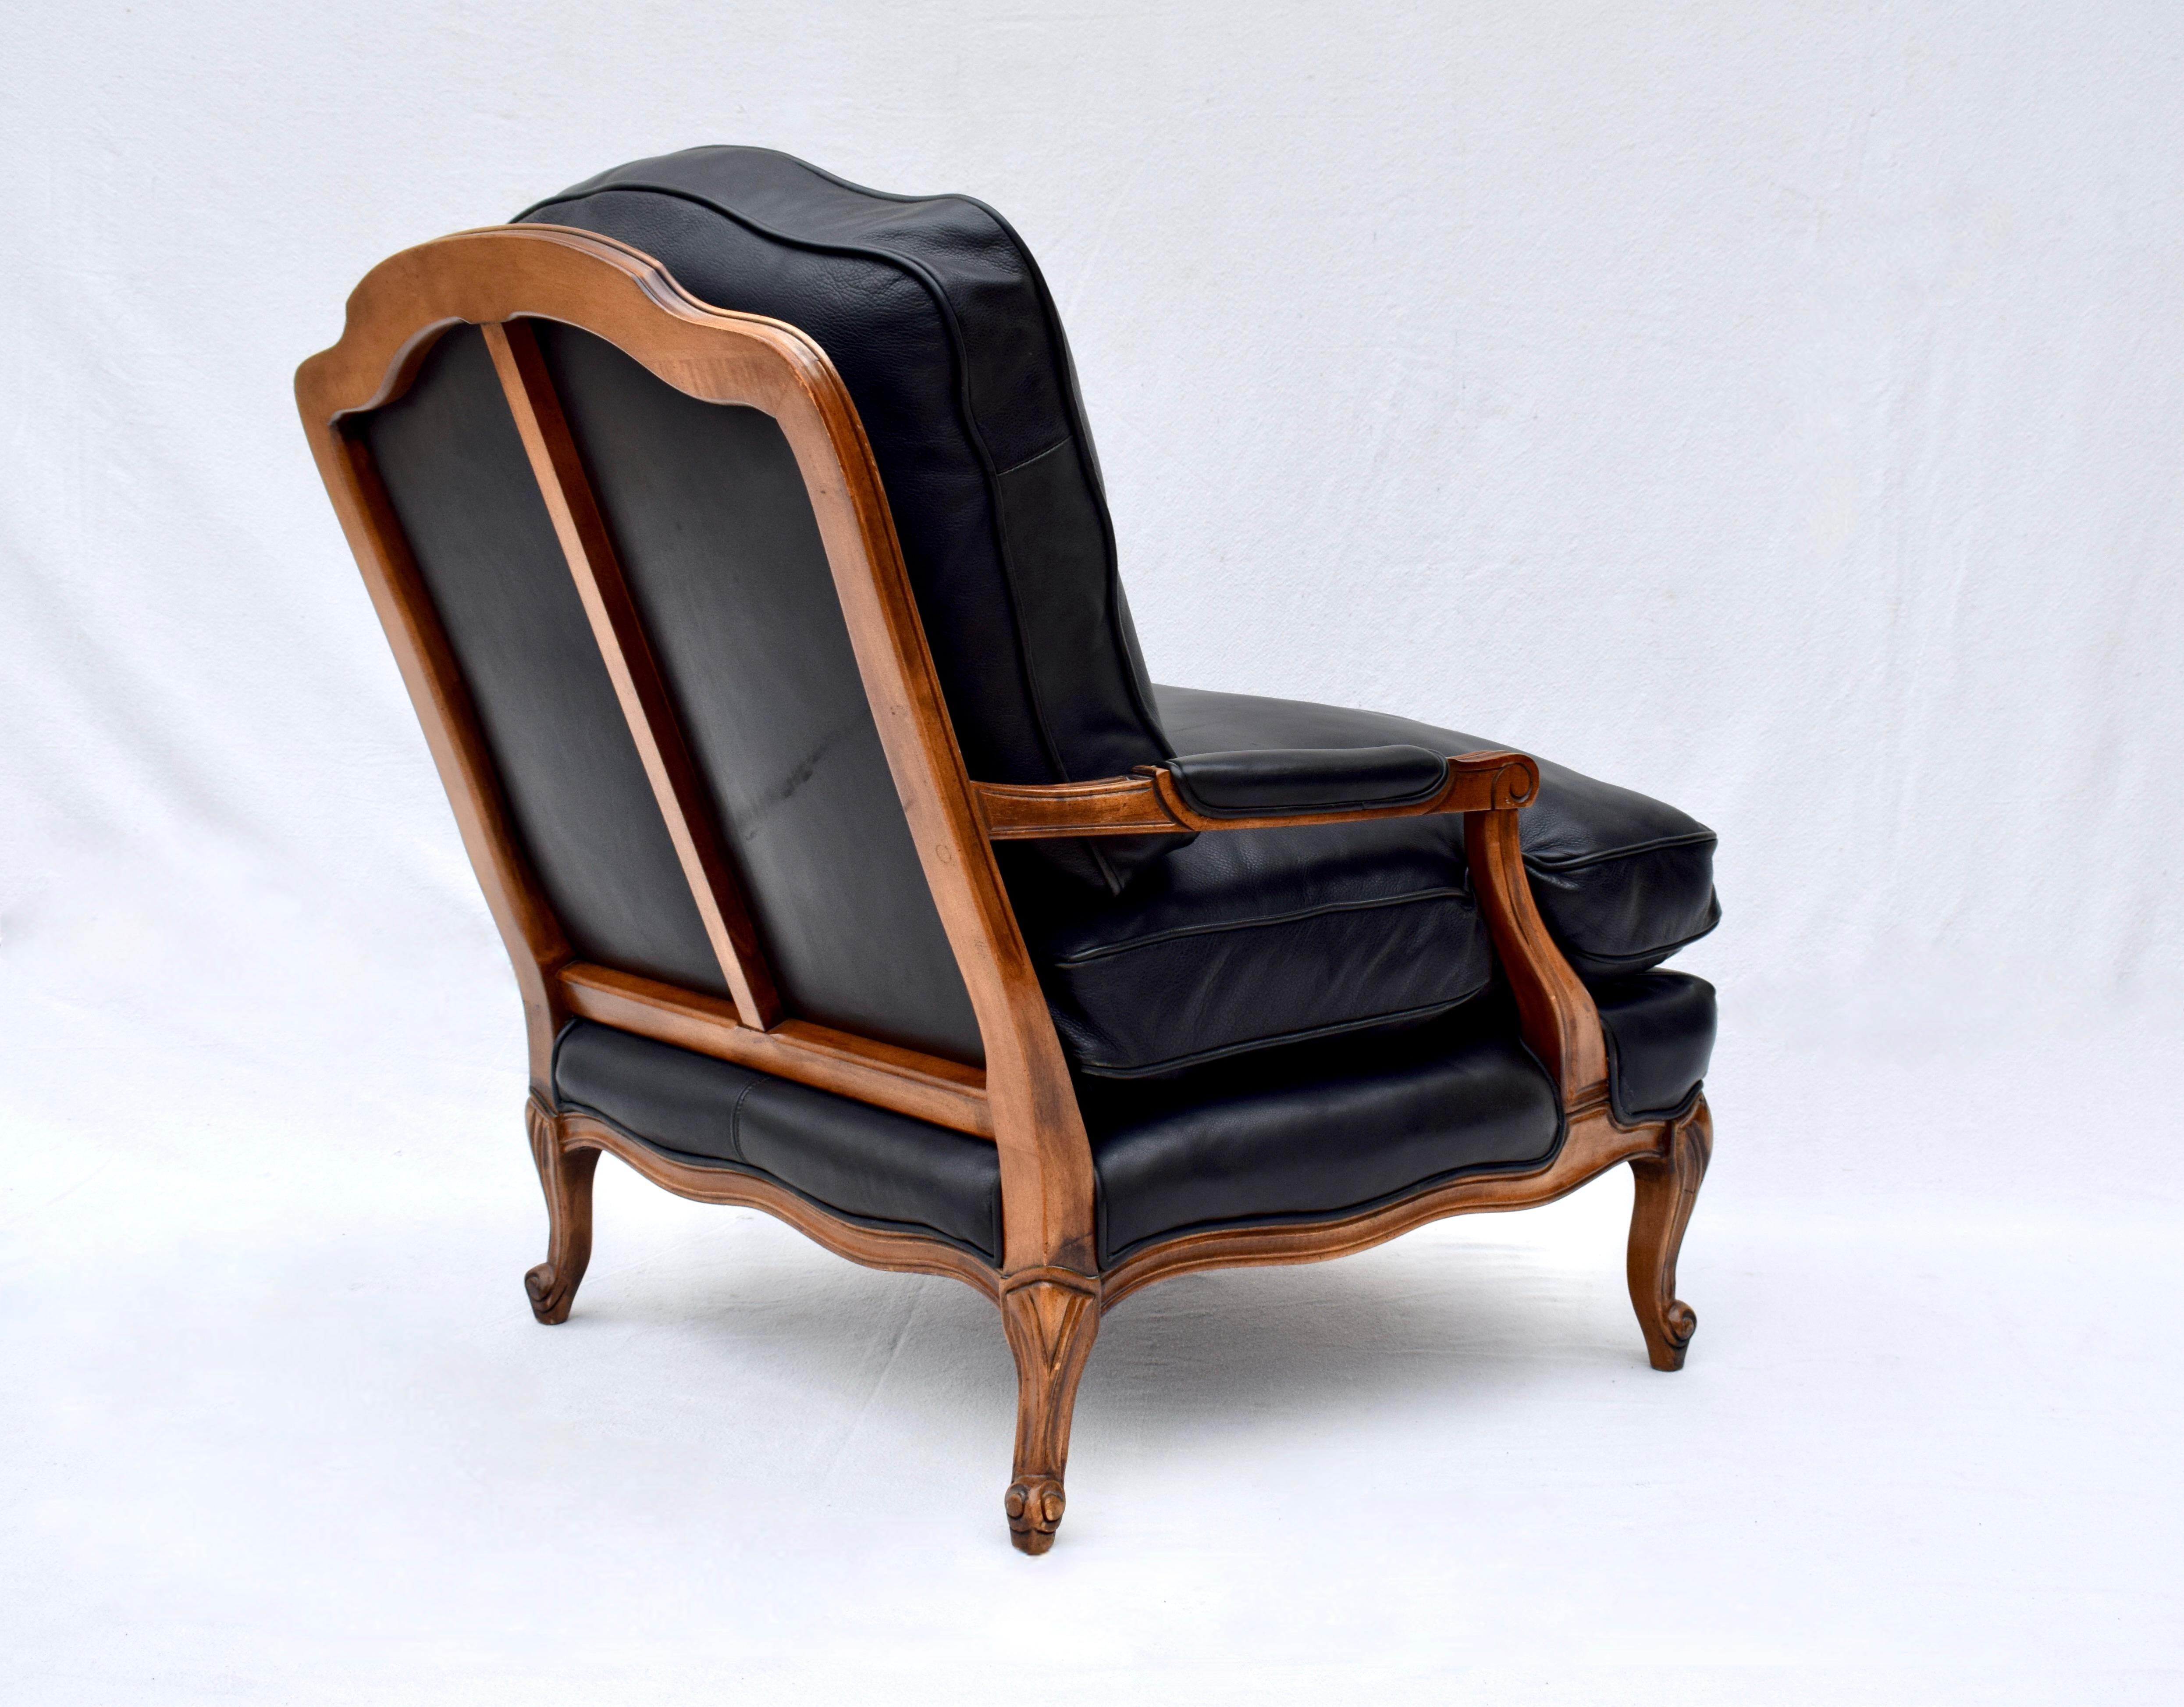 French Provincial Woodward & Lothrop Top of the Line Black Leather and Walnut Club Chair & Ottoman